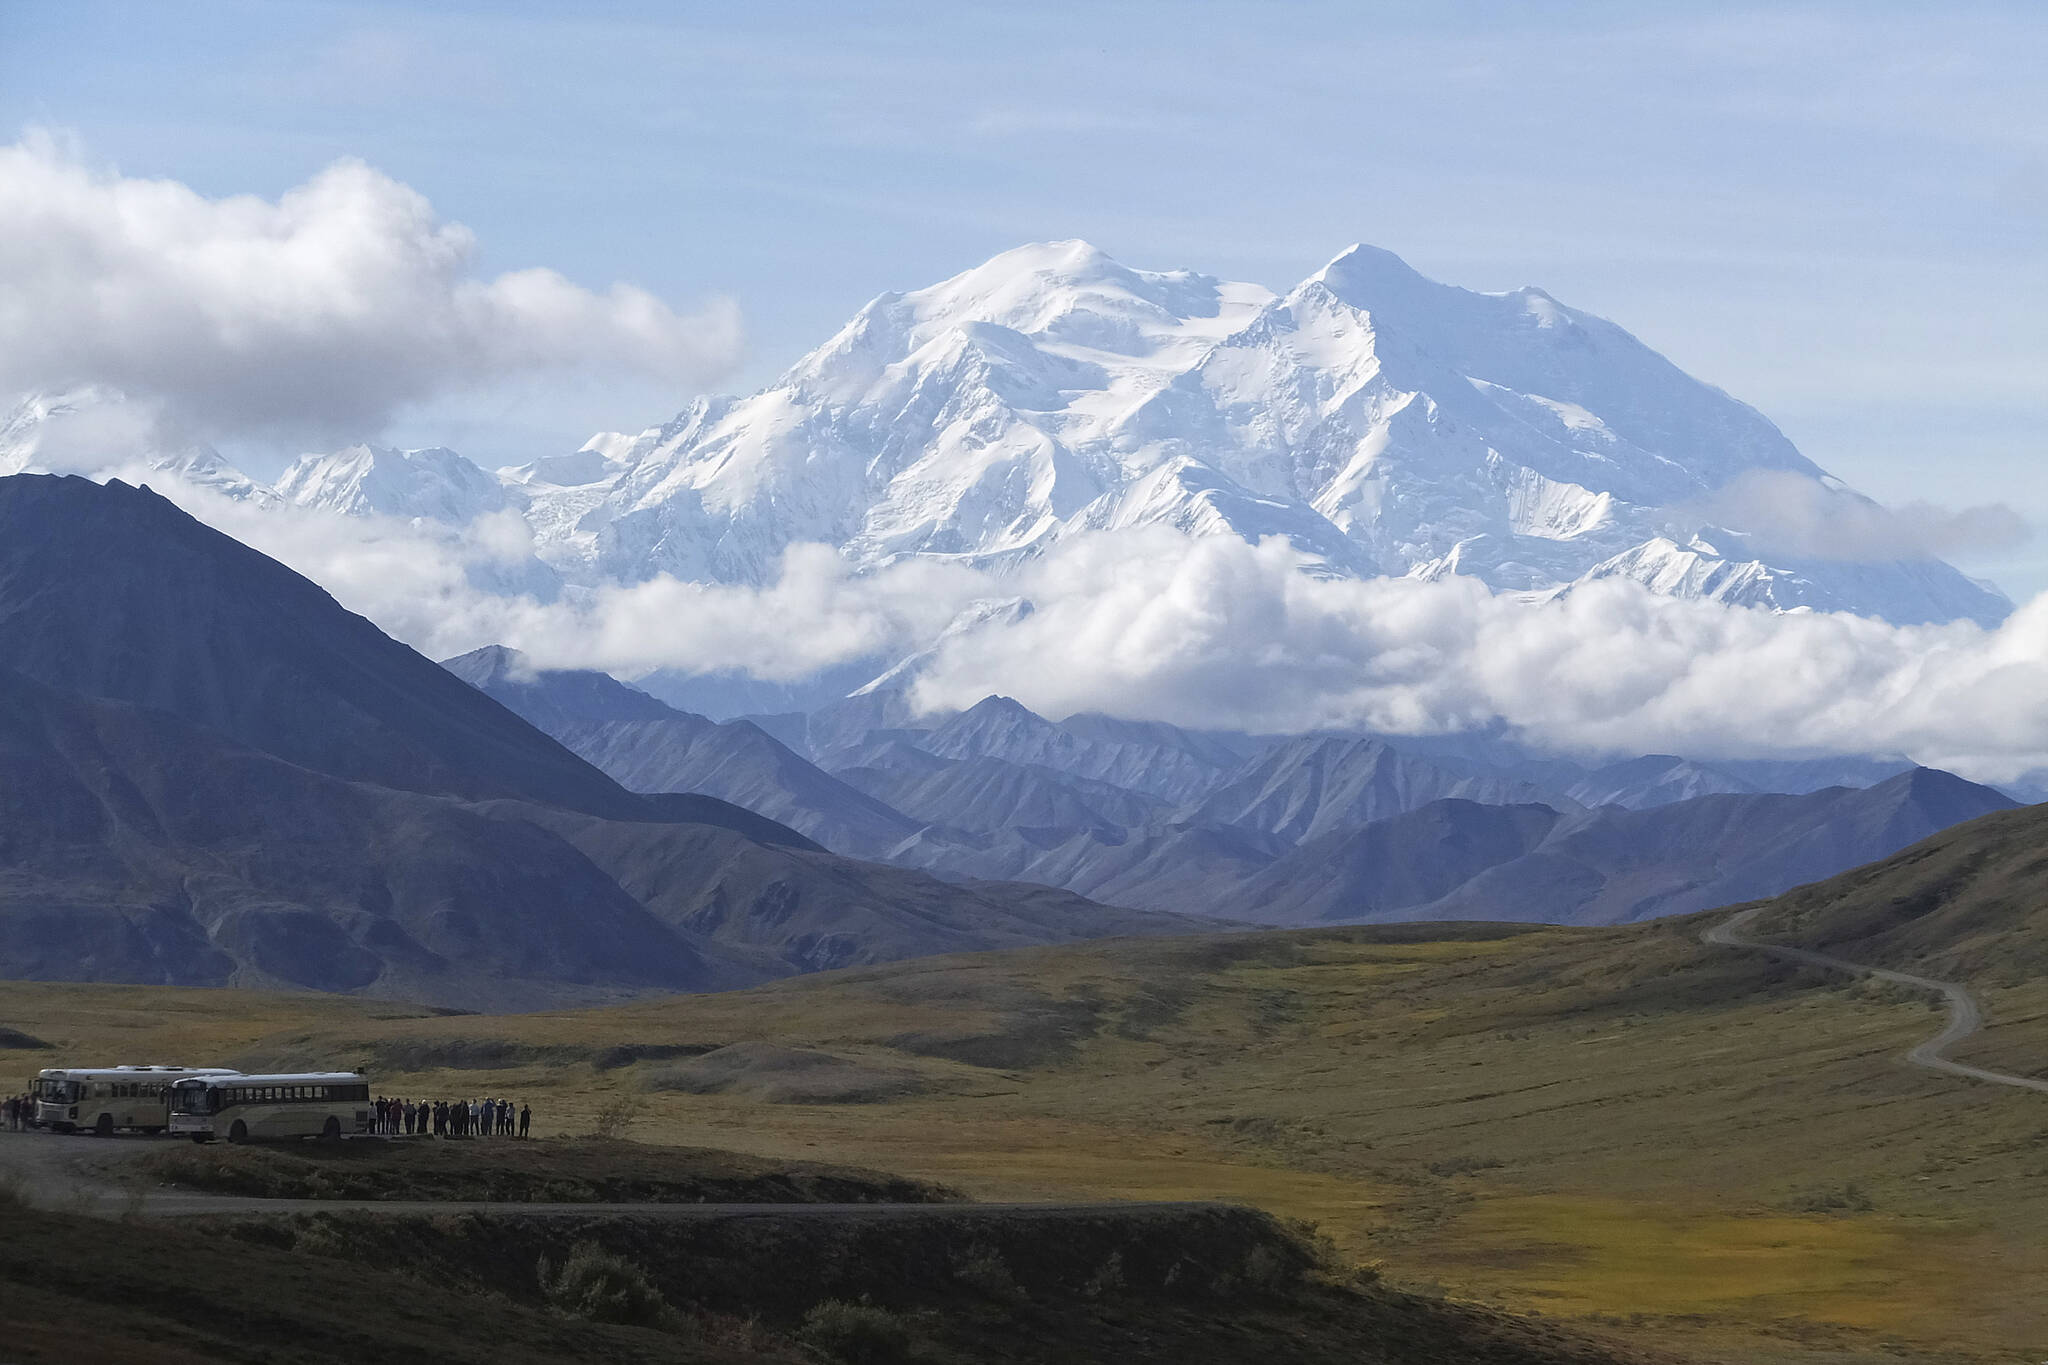 Sightseeing buses and tourists are seen at a pullout popular for taking in views of North America’s tallest peak, Denali, in Denali National Park and Preserve, Alaska, on Aug. 26, 2016. The U.S. Interior Department plans to use $25 million in federal infrastructure funds on a bridge project over a slumping section of the only road into Denali National Park and Preserve. Park officials have attributed the accelerated slumping to climate change, and closed about half the 92-mile park road until they can address the repairs. (AP Photo / Becky Bohrer)